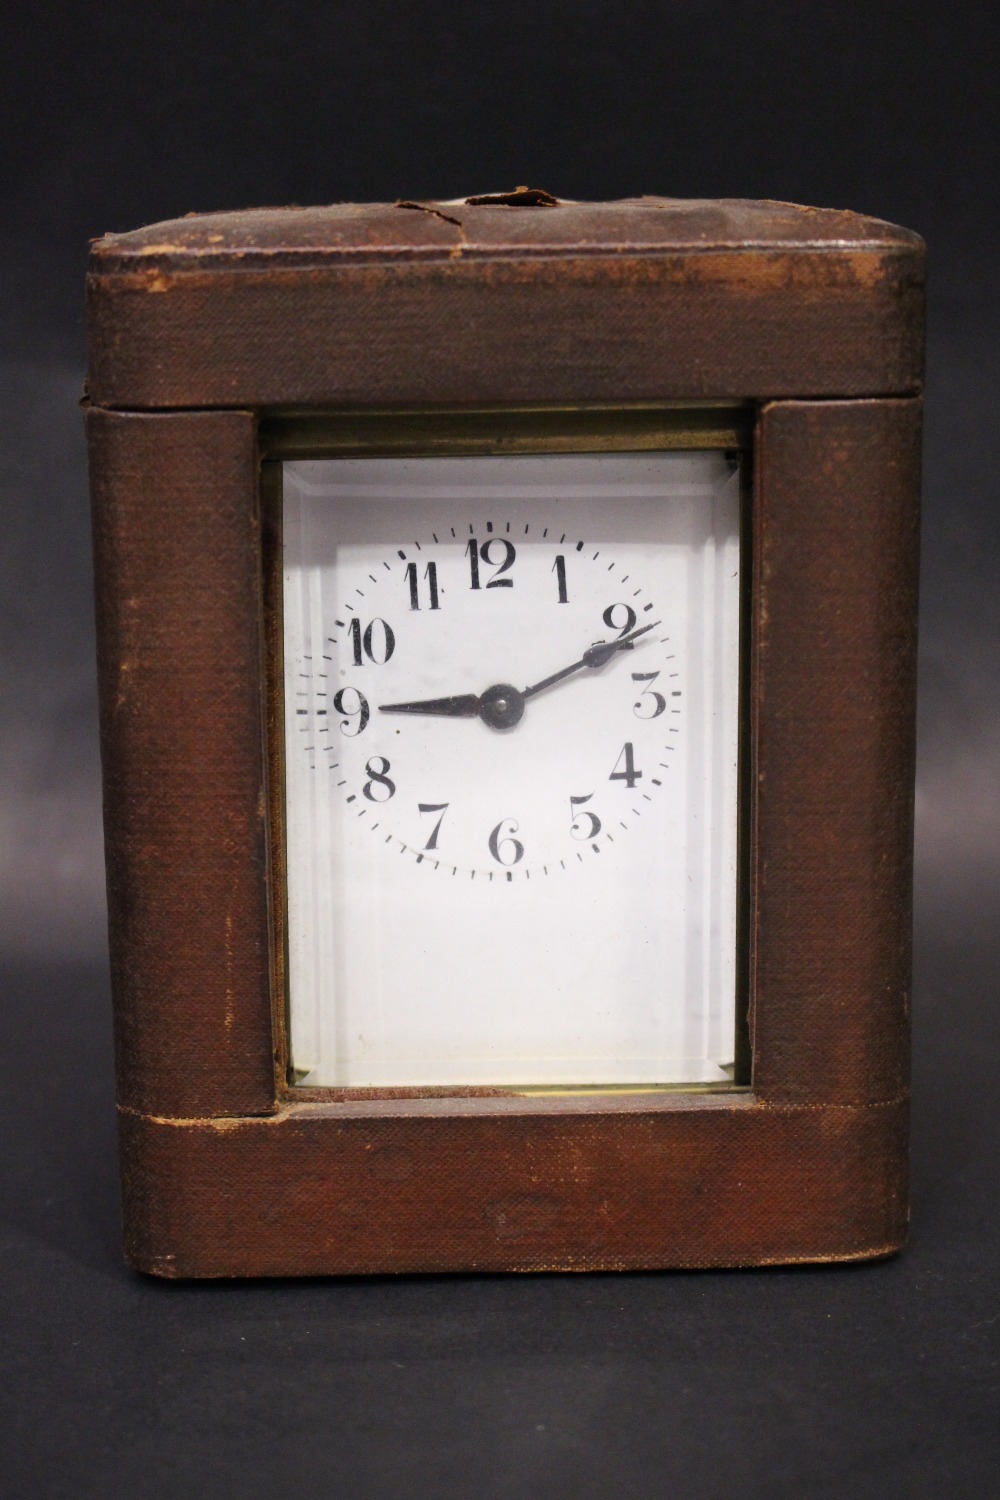 A FRENCH CASH CARRIAGE CLOCK, brass frame, bevelled glass on all sides, 5" x 4" x 3.5" approx case